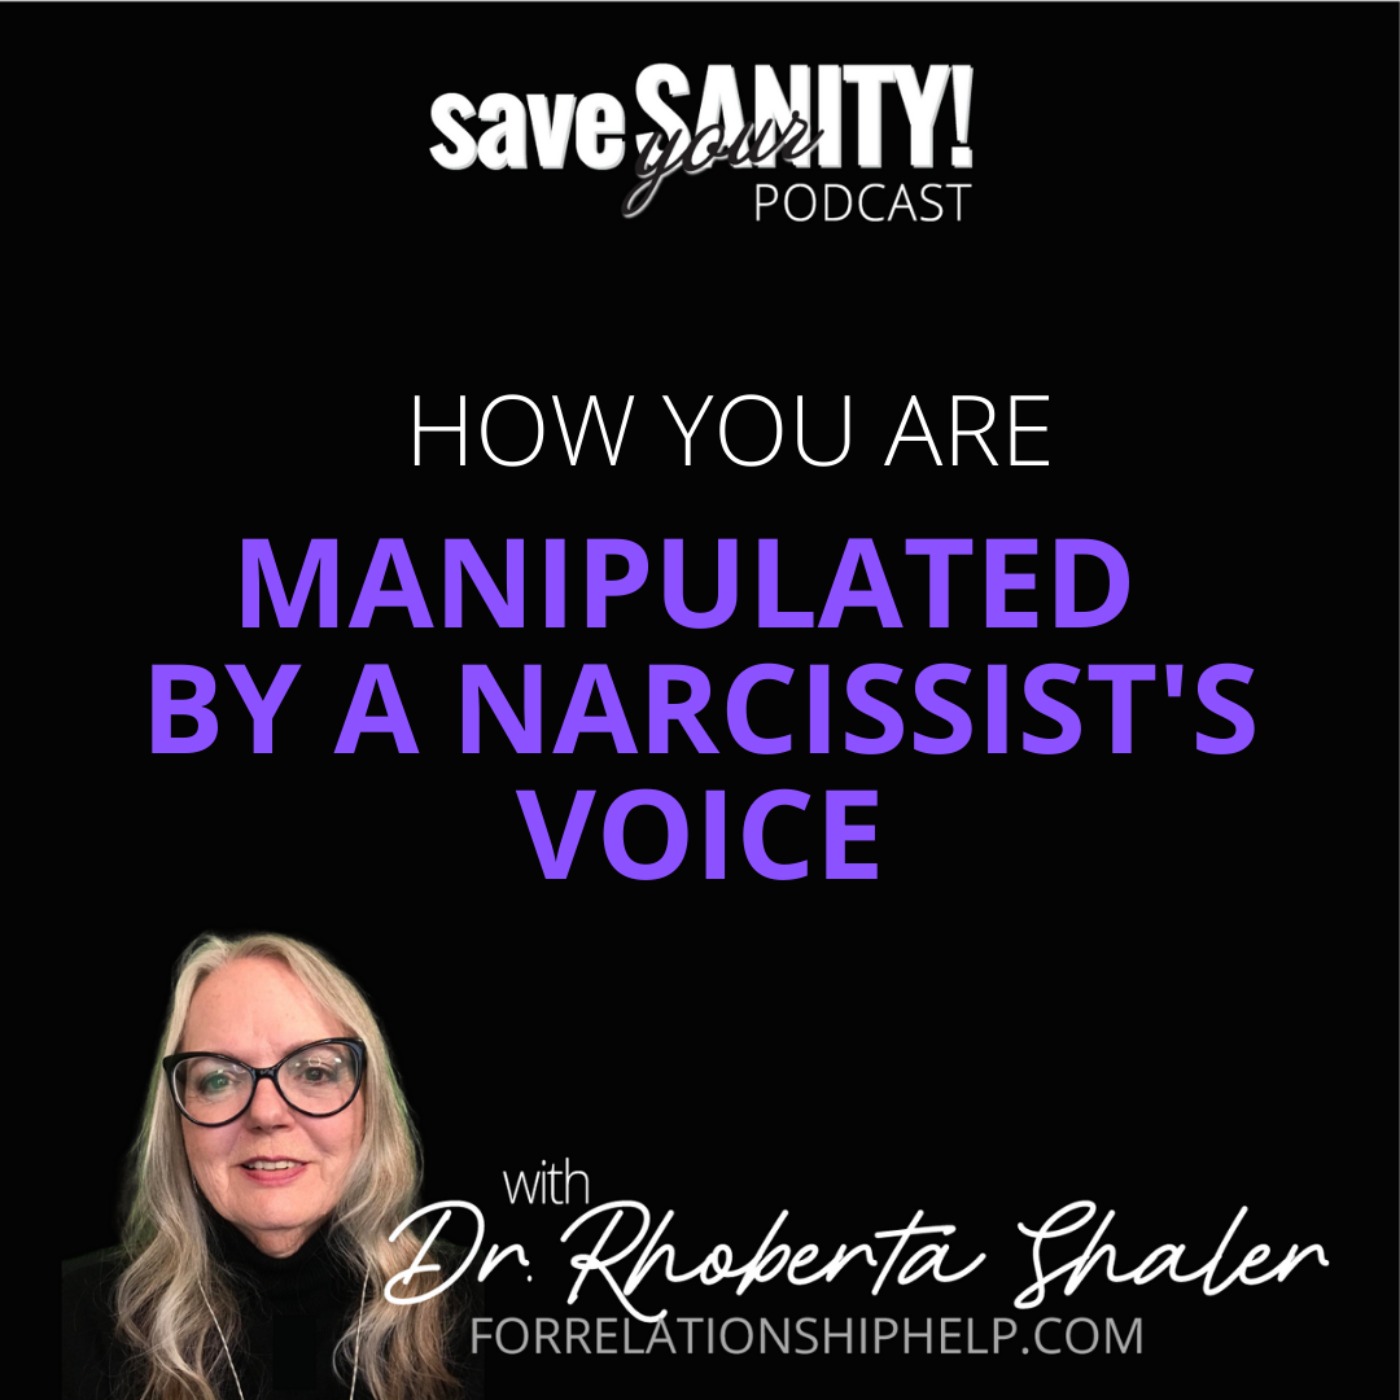 How You Are Manipulated By a Narcissist's Voice